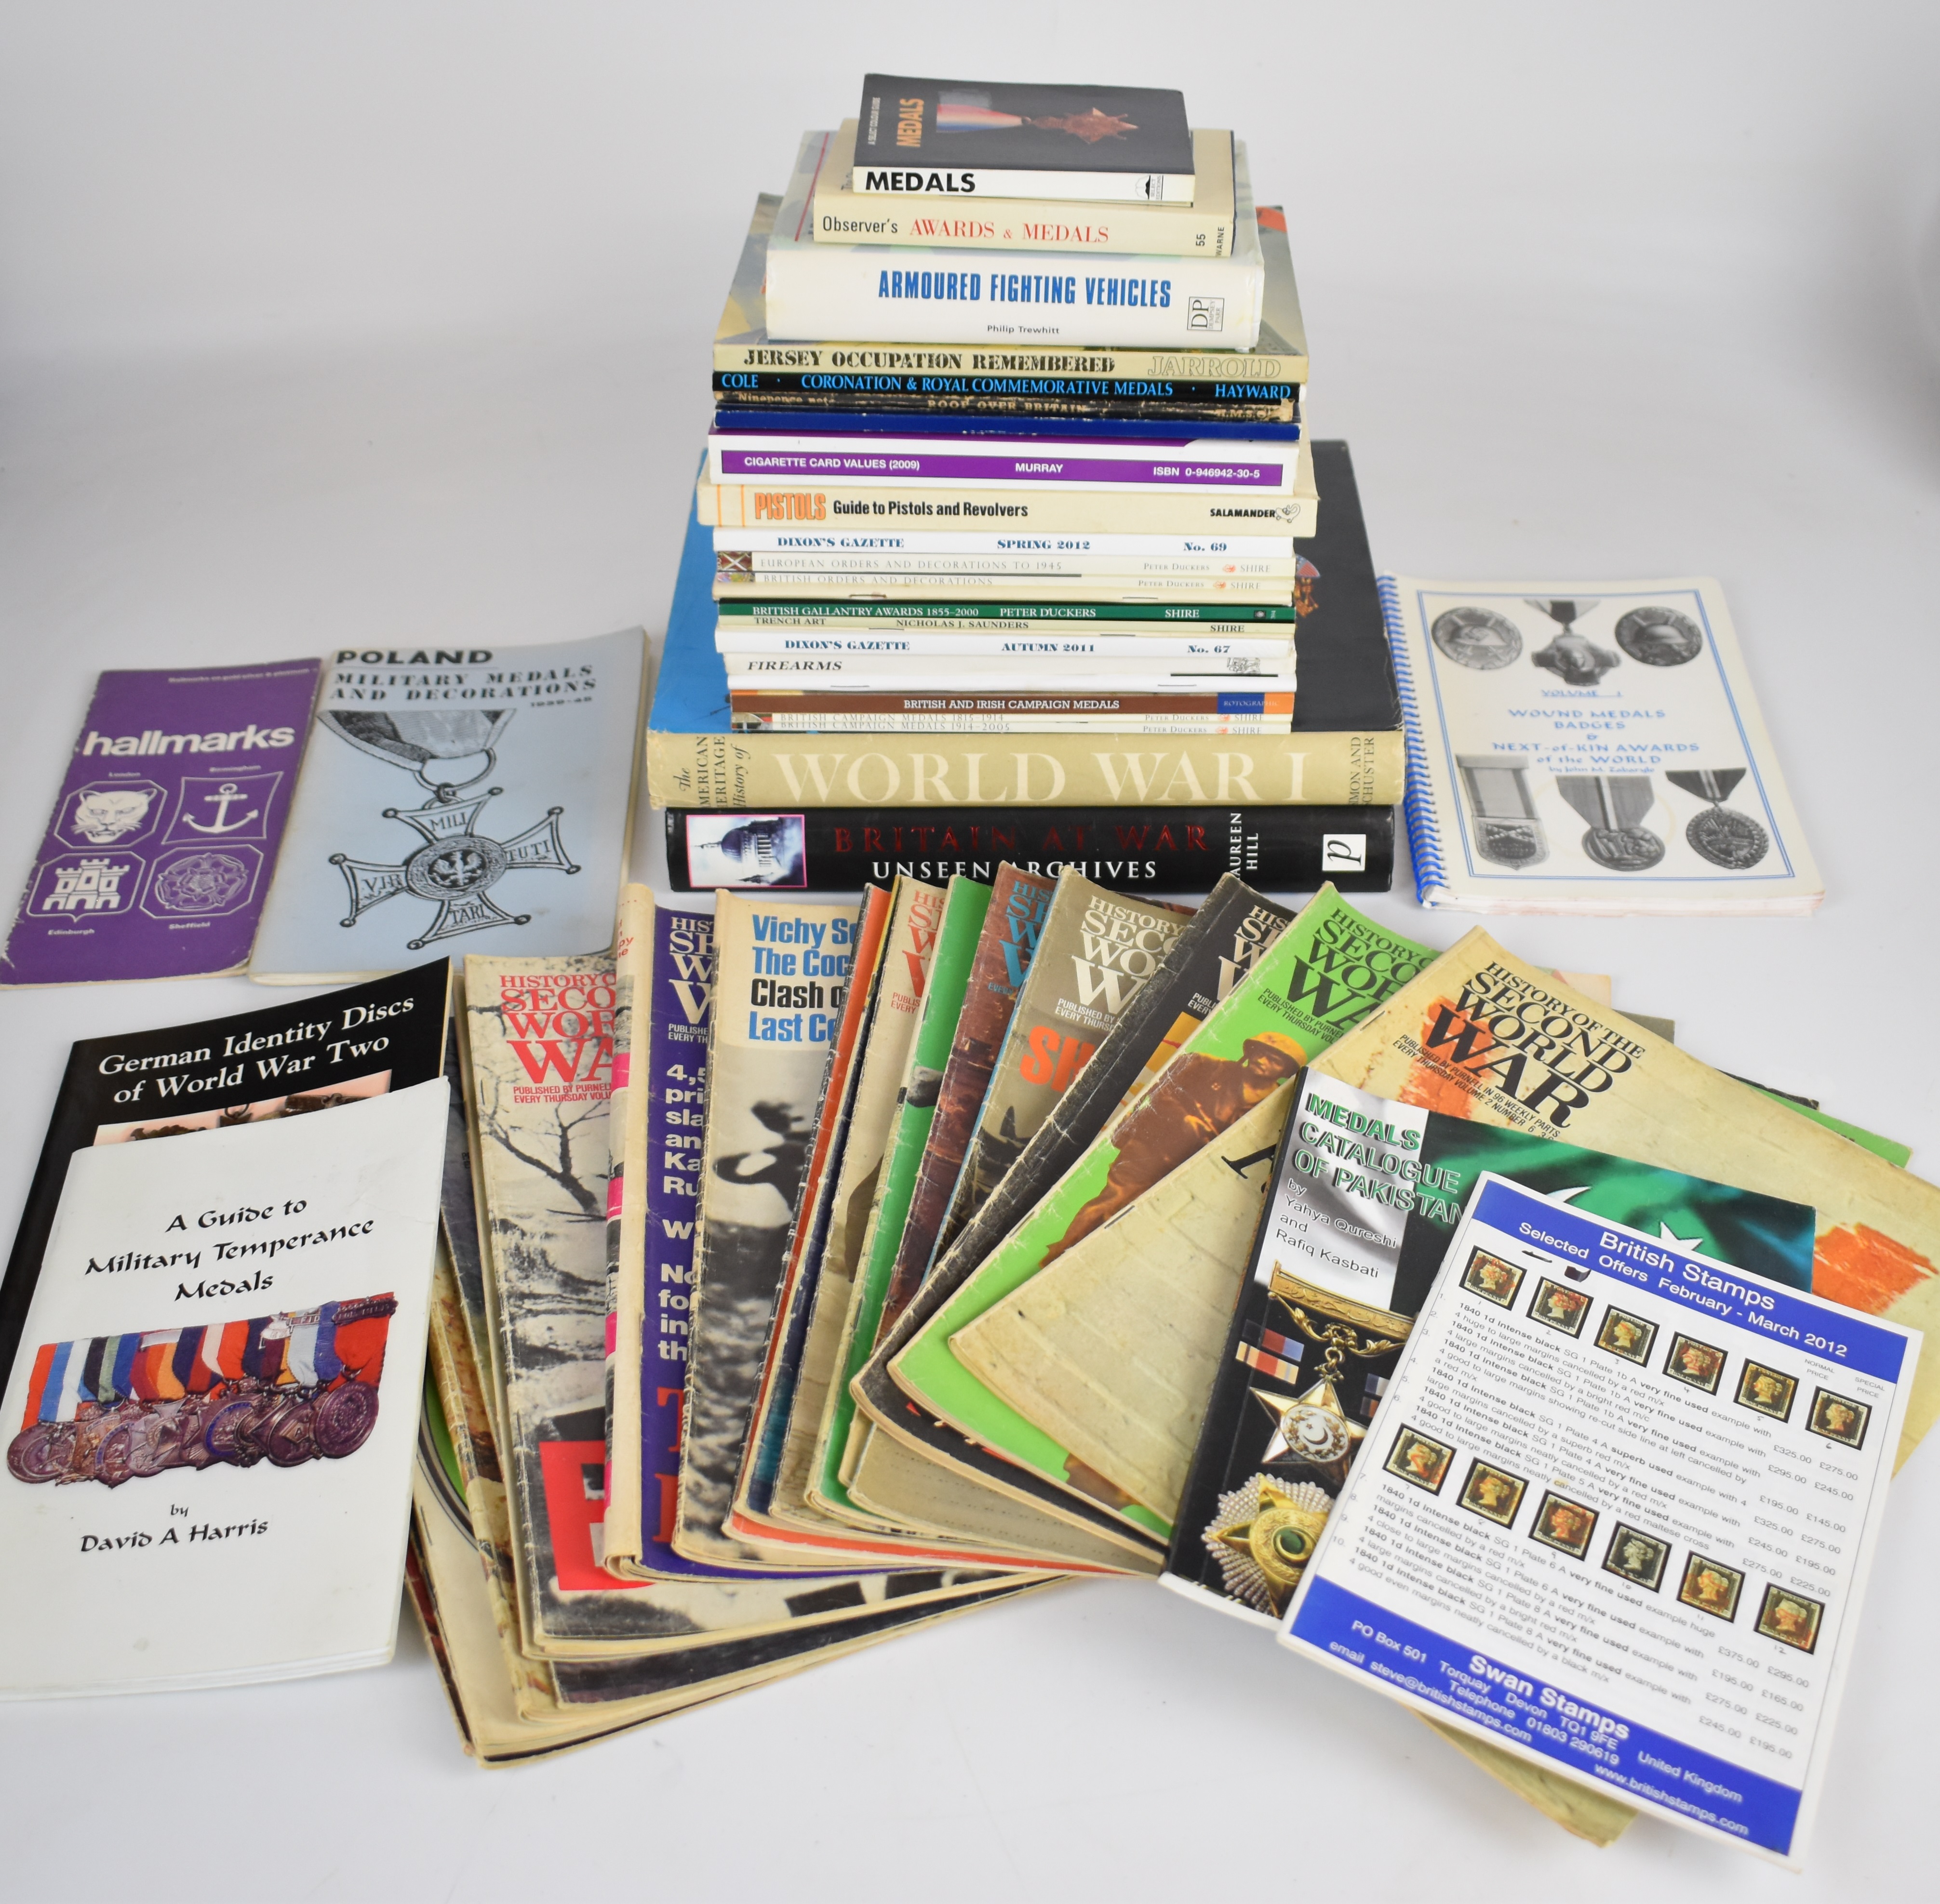 Collection of approximately 40 military reference books and magazines including German Identity